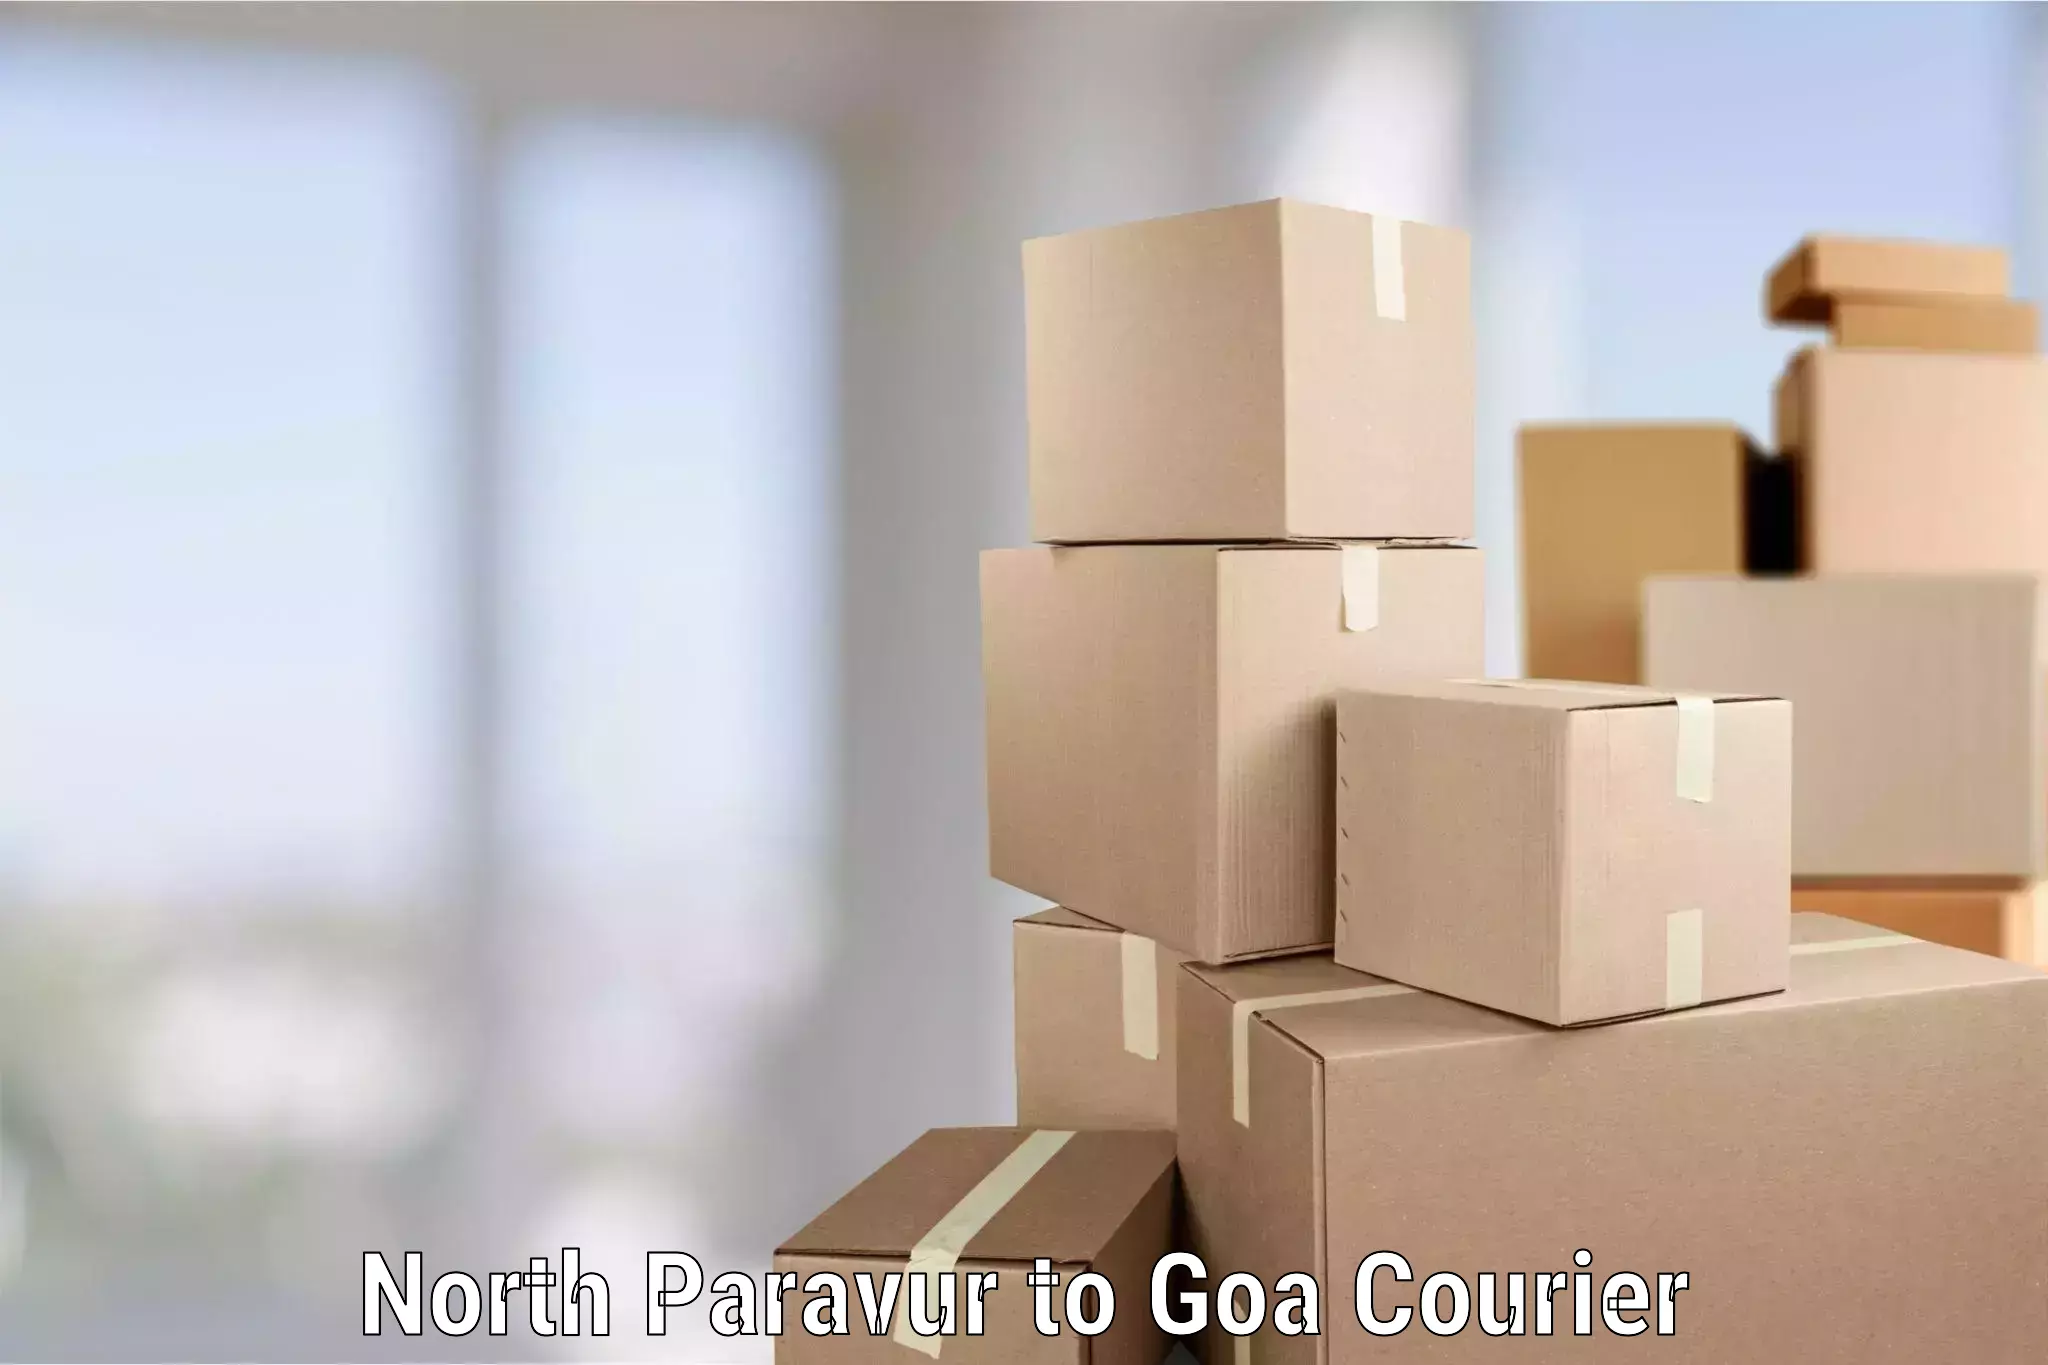 Long-distance moving services North Paravur to Panaji